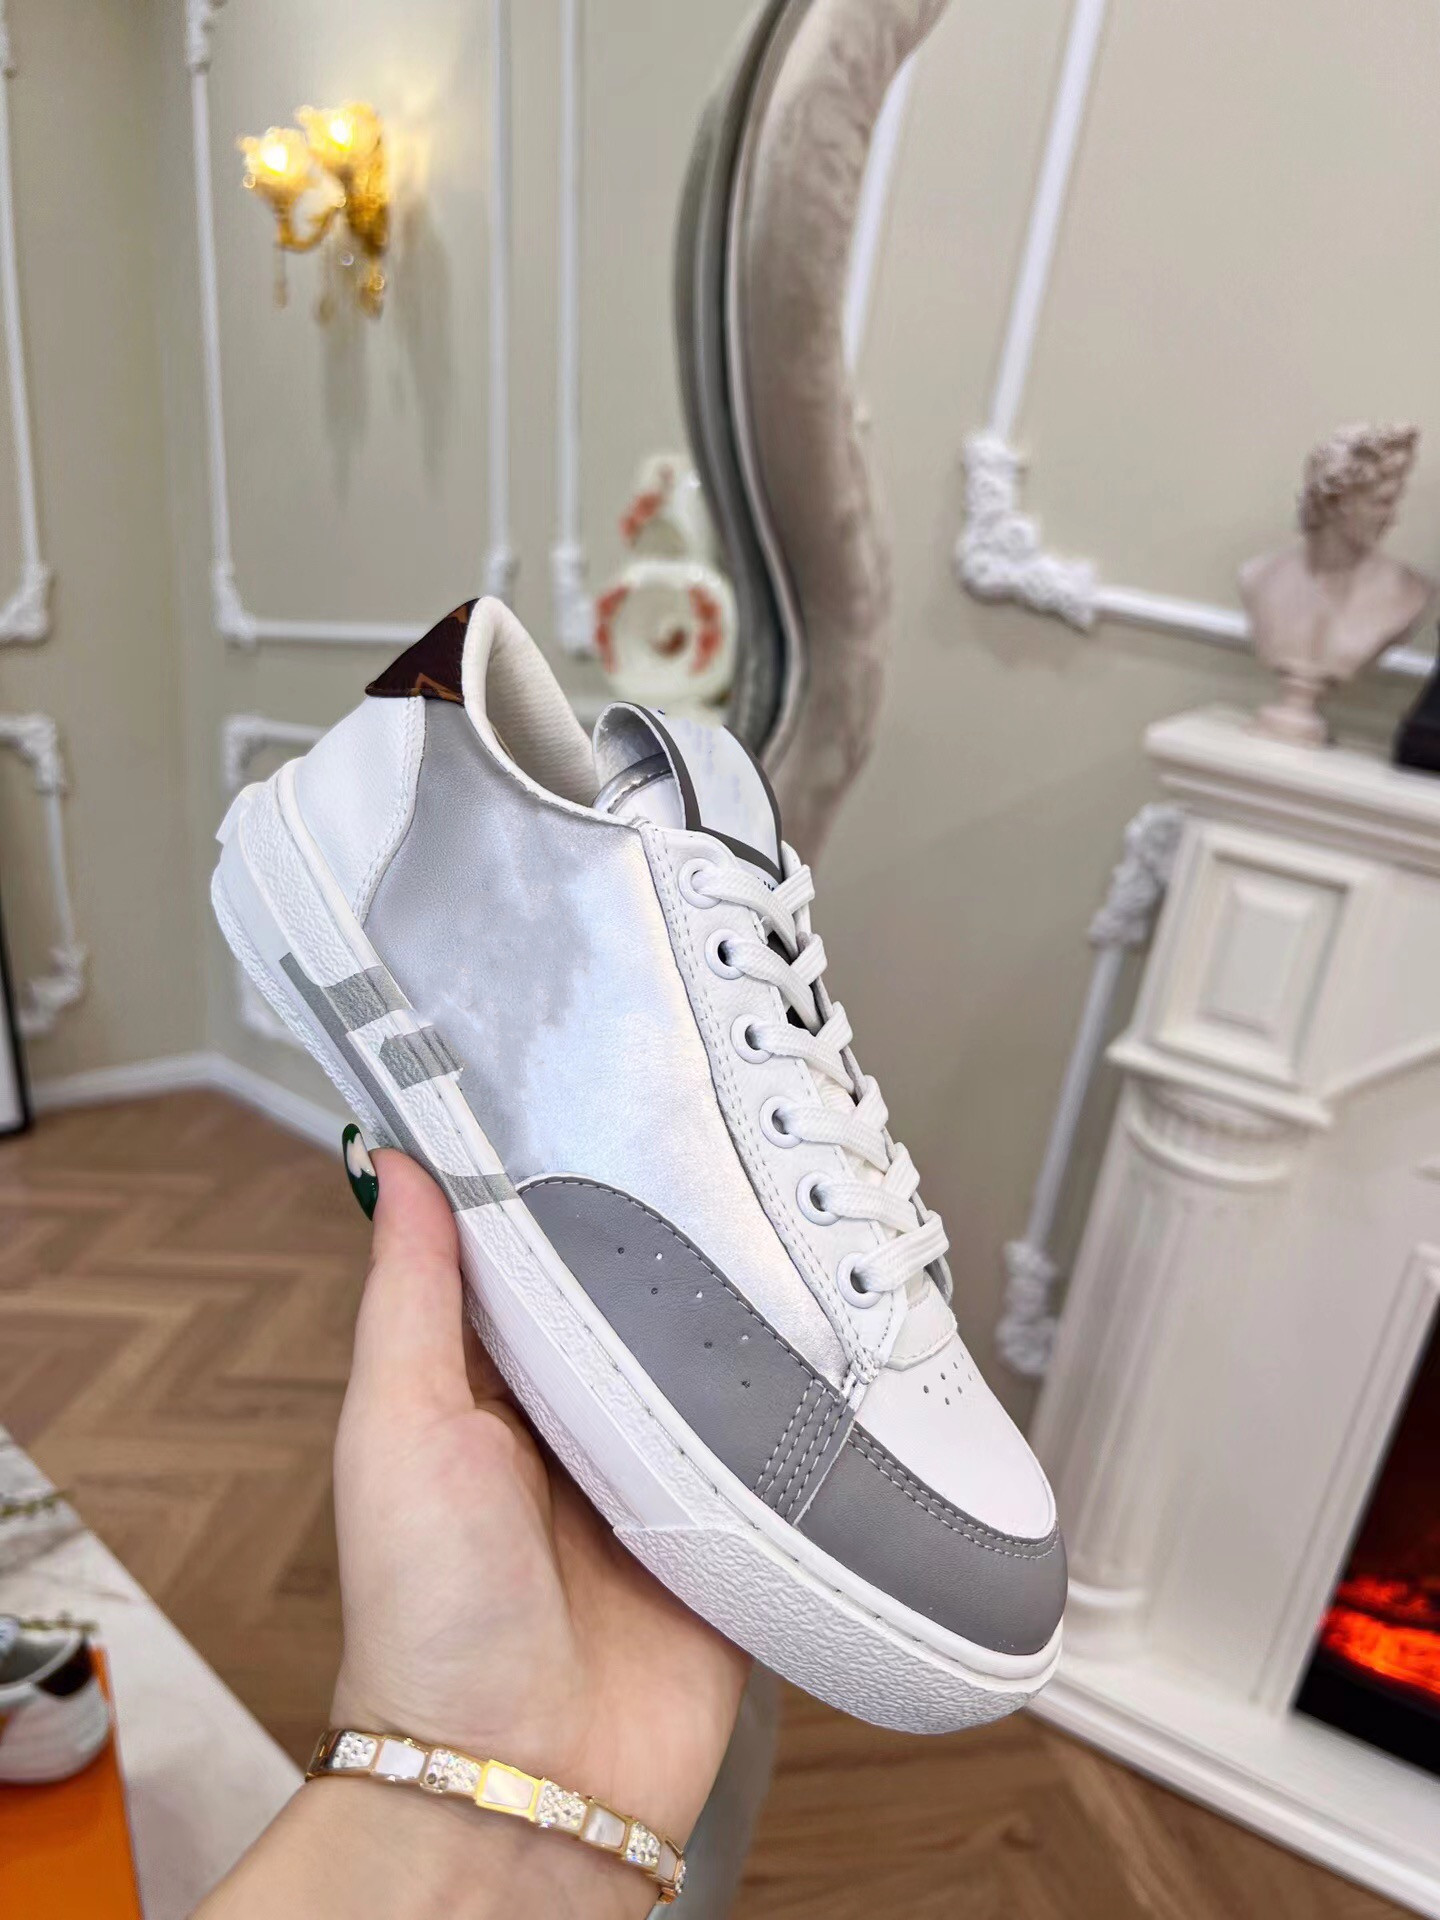 

New top Hot Designer Men Causal Shoes Fashion Woman Leather Lace Up Platform Sole Sneakers 0502, 02